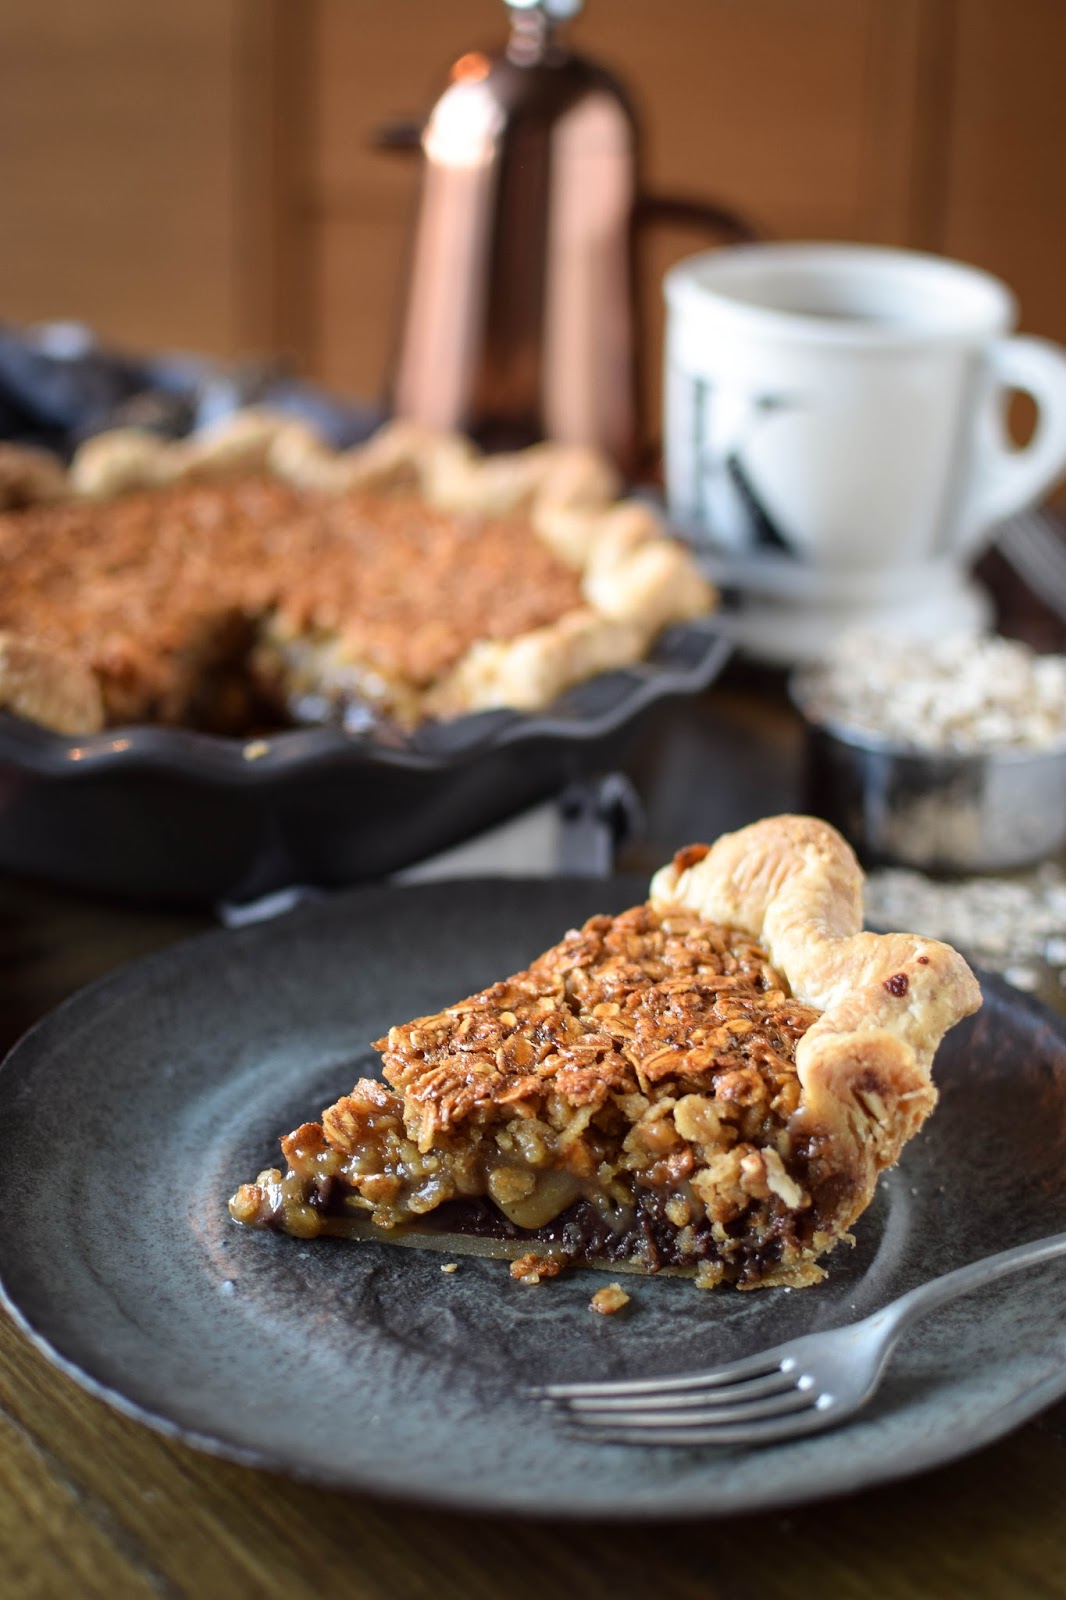 Often referred to as poor mans pecan pie this black bottomed oatmeal pie is a bit easier on the pockets that it's nutty sibling. A layer of chocolate ganache topped with a syrupy oatmeal filling sitting in a buttery crust makes this a truly rich and decadent dessert. There's nothing poor about this pie.